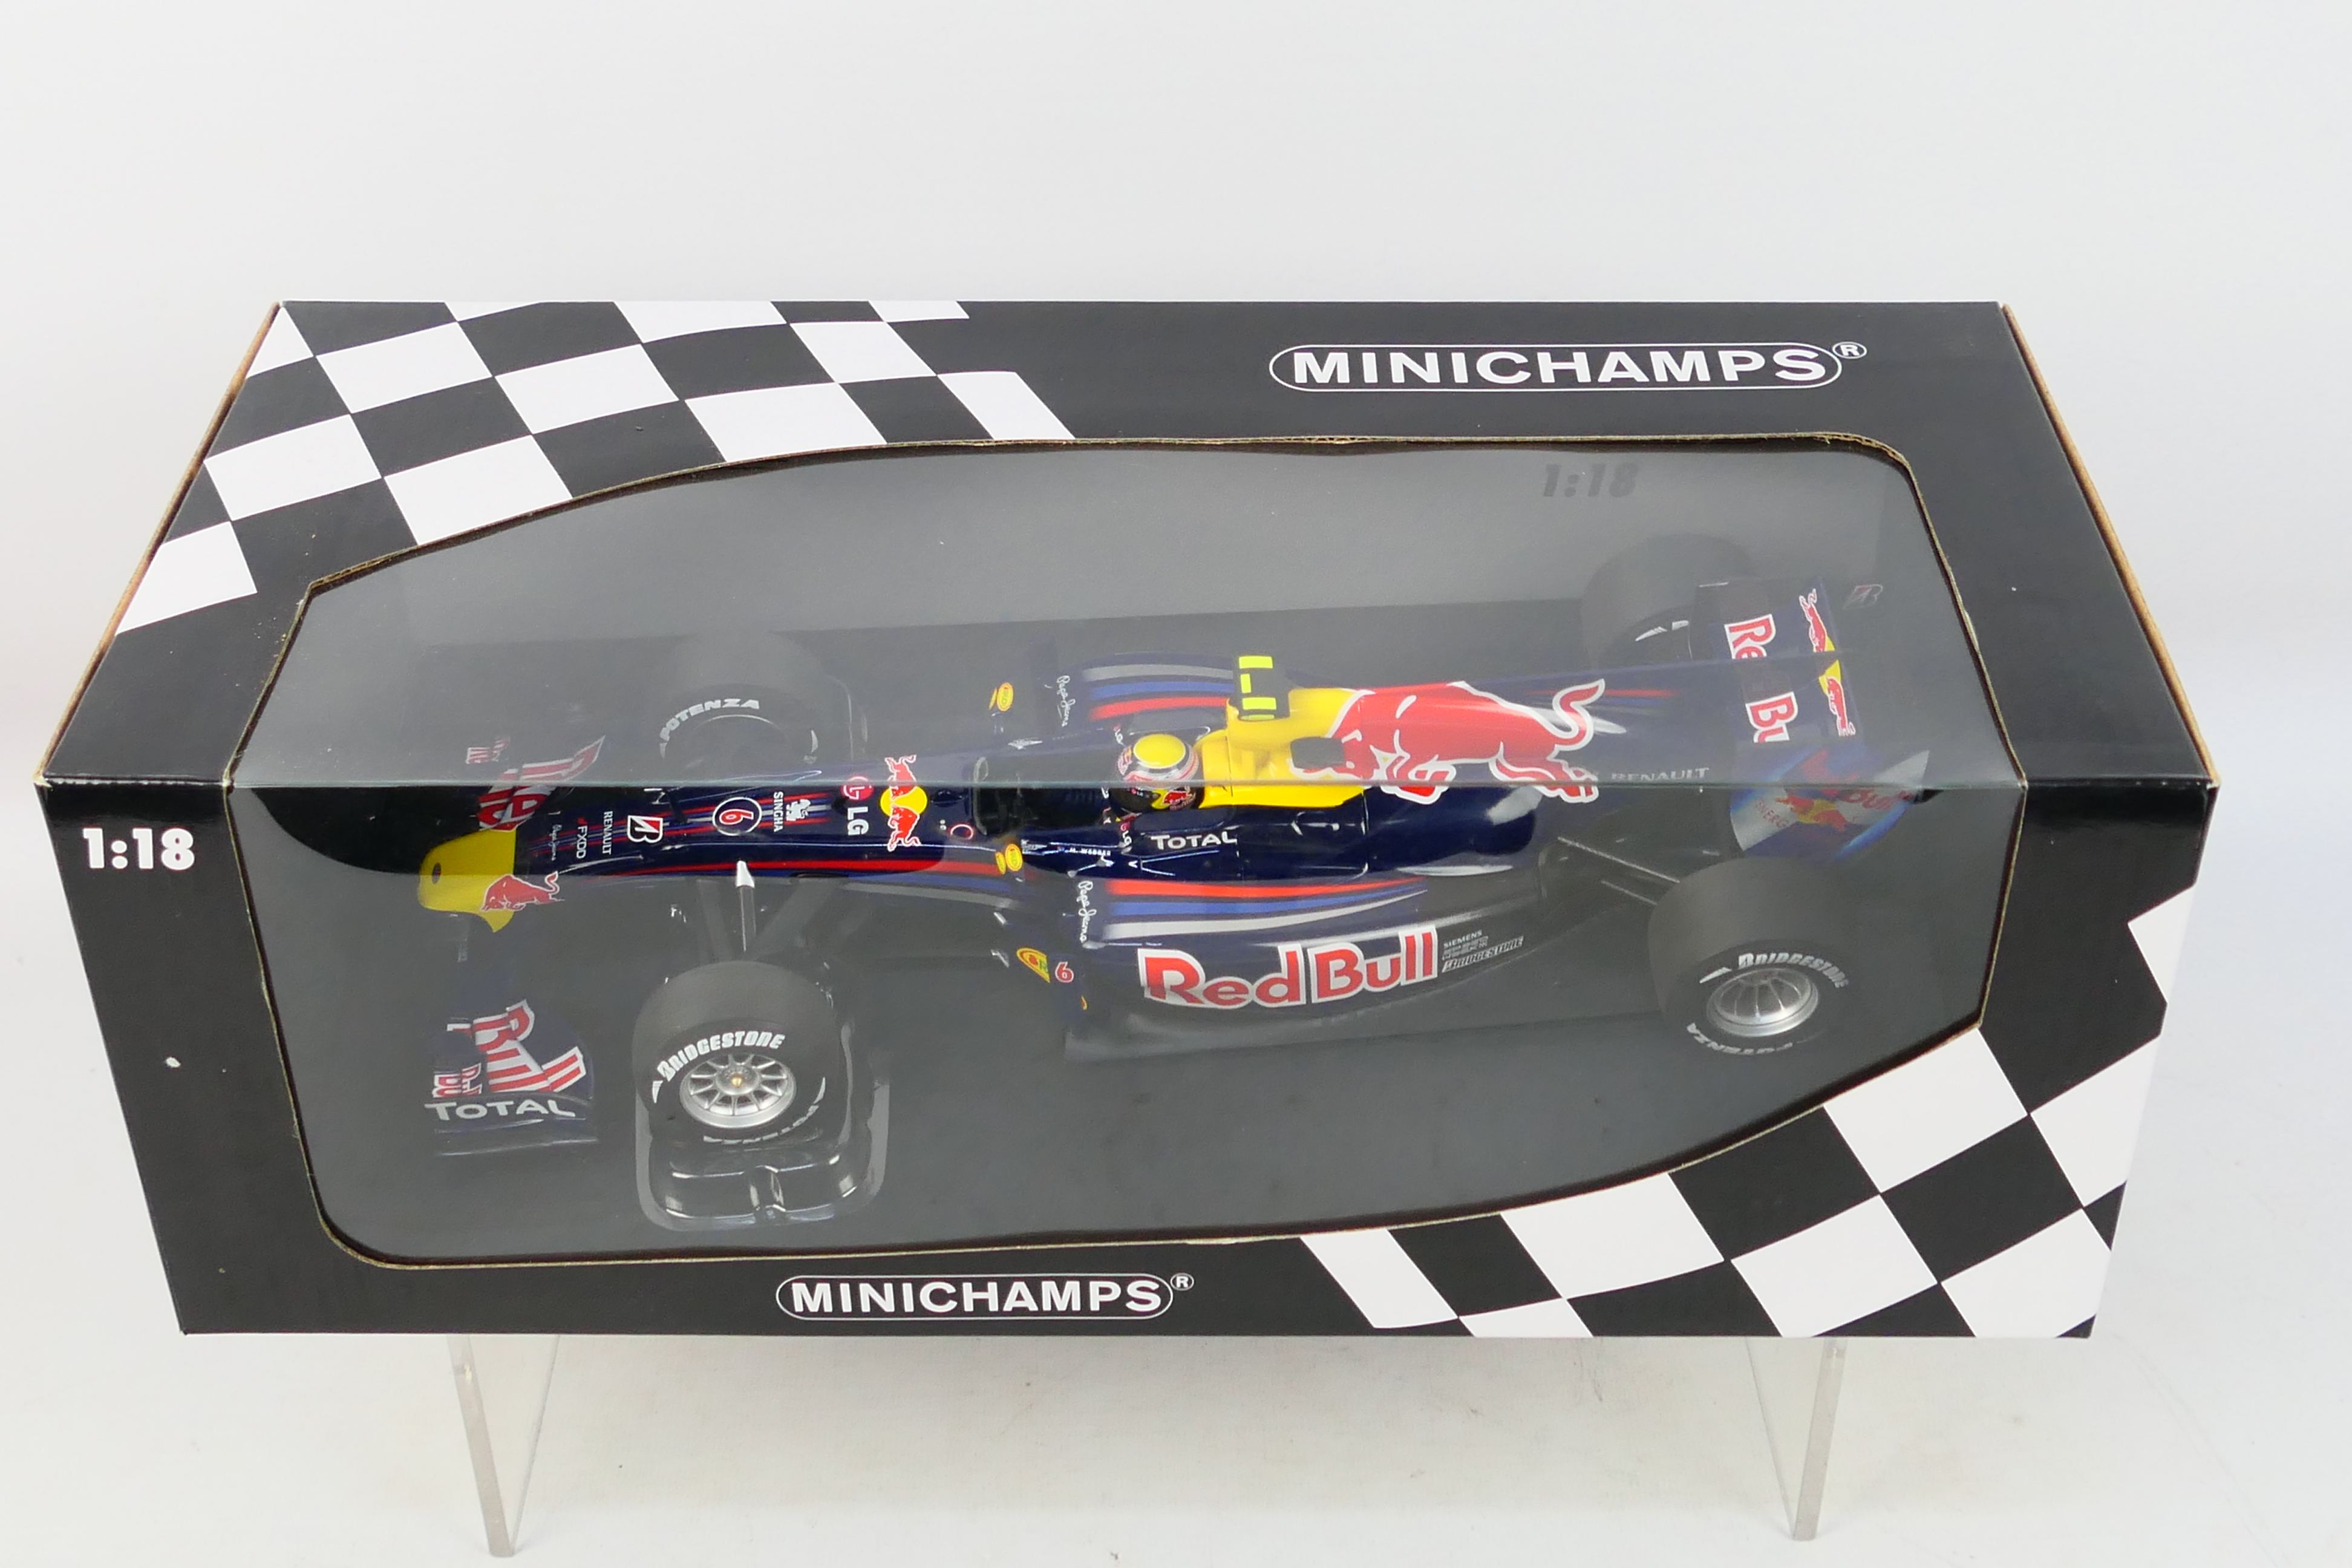 Minichamps - A boxed 1:18 scale Red Bull Racing Renault RB6 Mark Webber 2010 car # 110100006. - Image 3 of 3